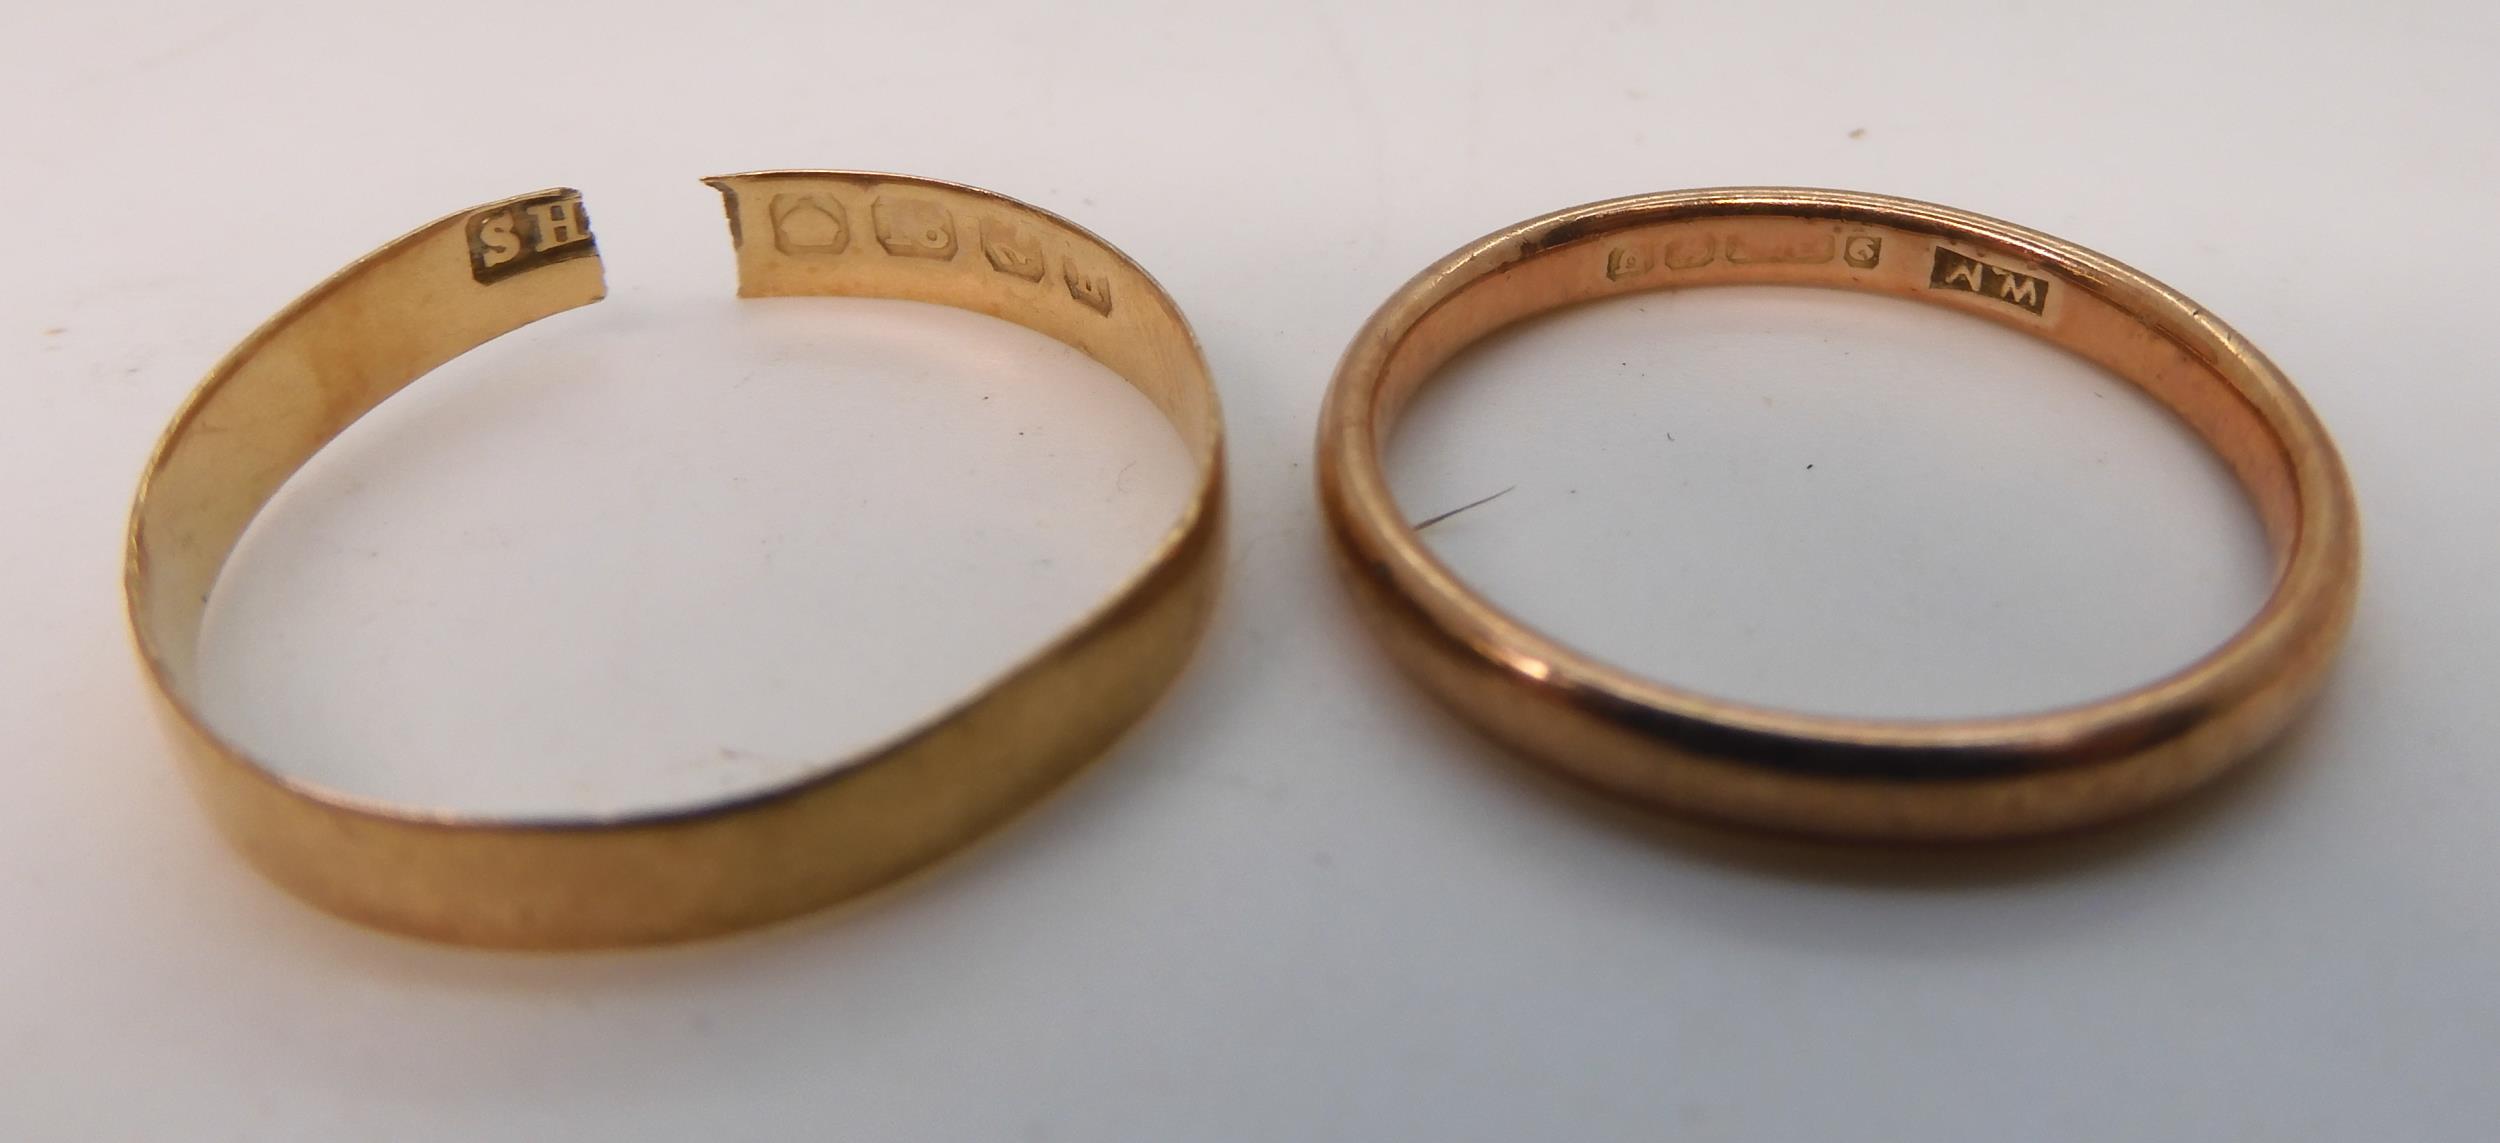 A 9ct gold signet ring, P1/2, buckle ring R1/2, a further two rose gold wedding rings, brooch and - Image 5 of 7